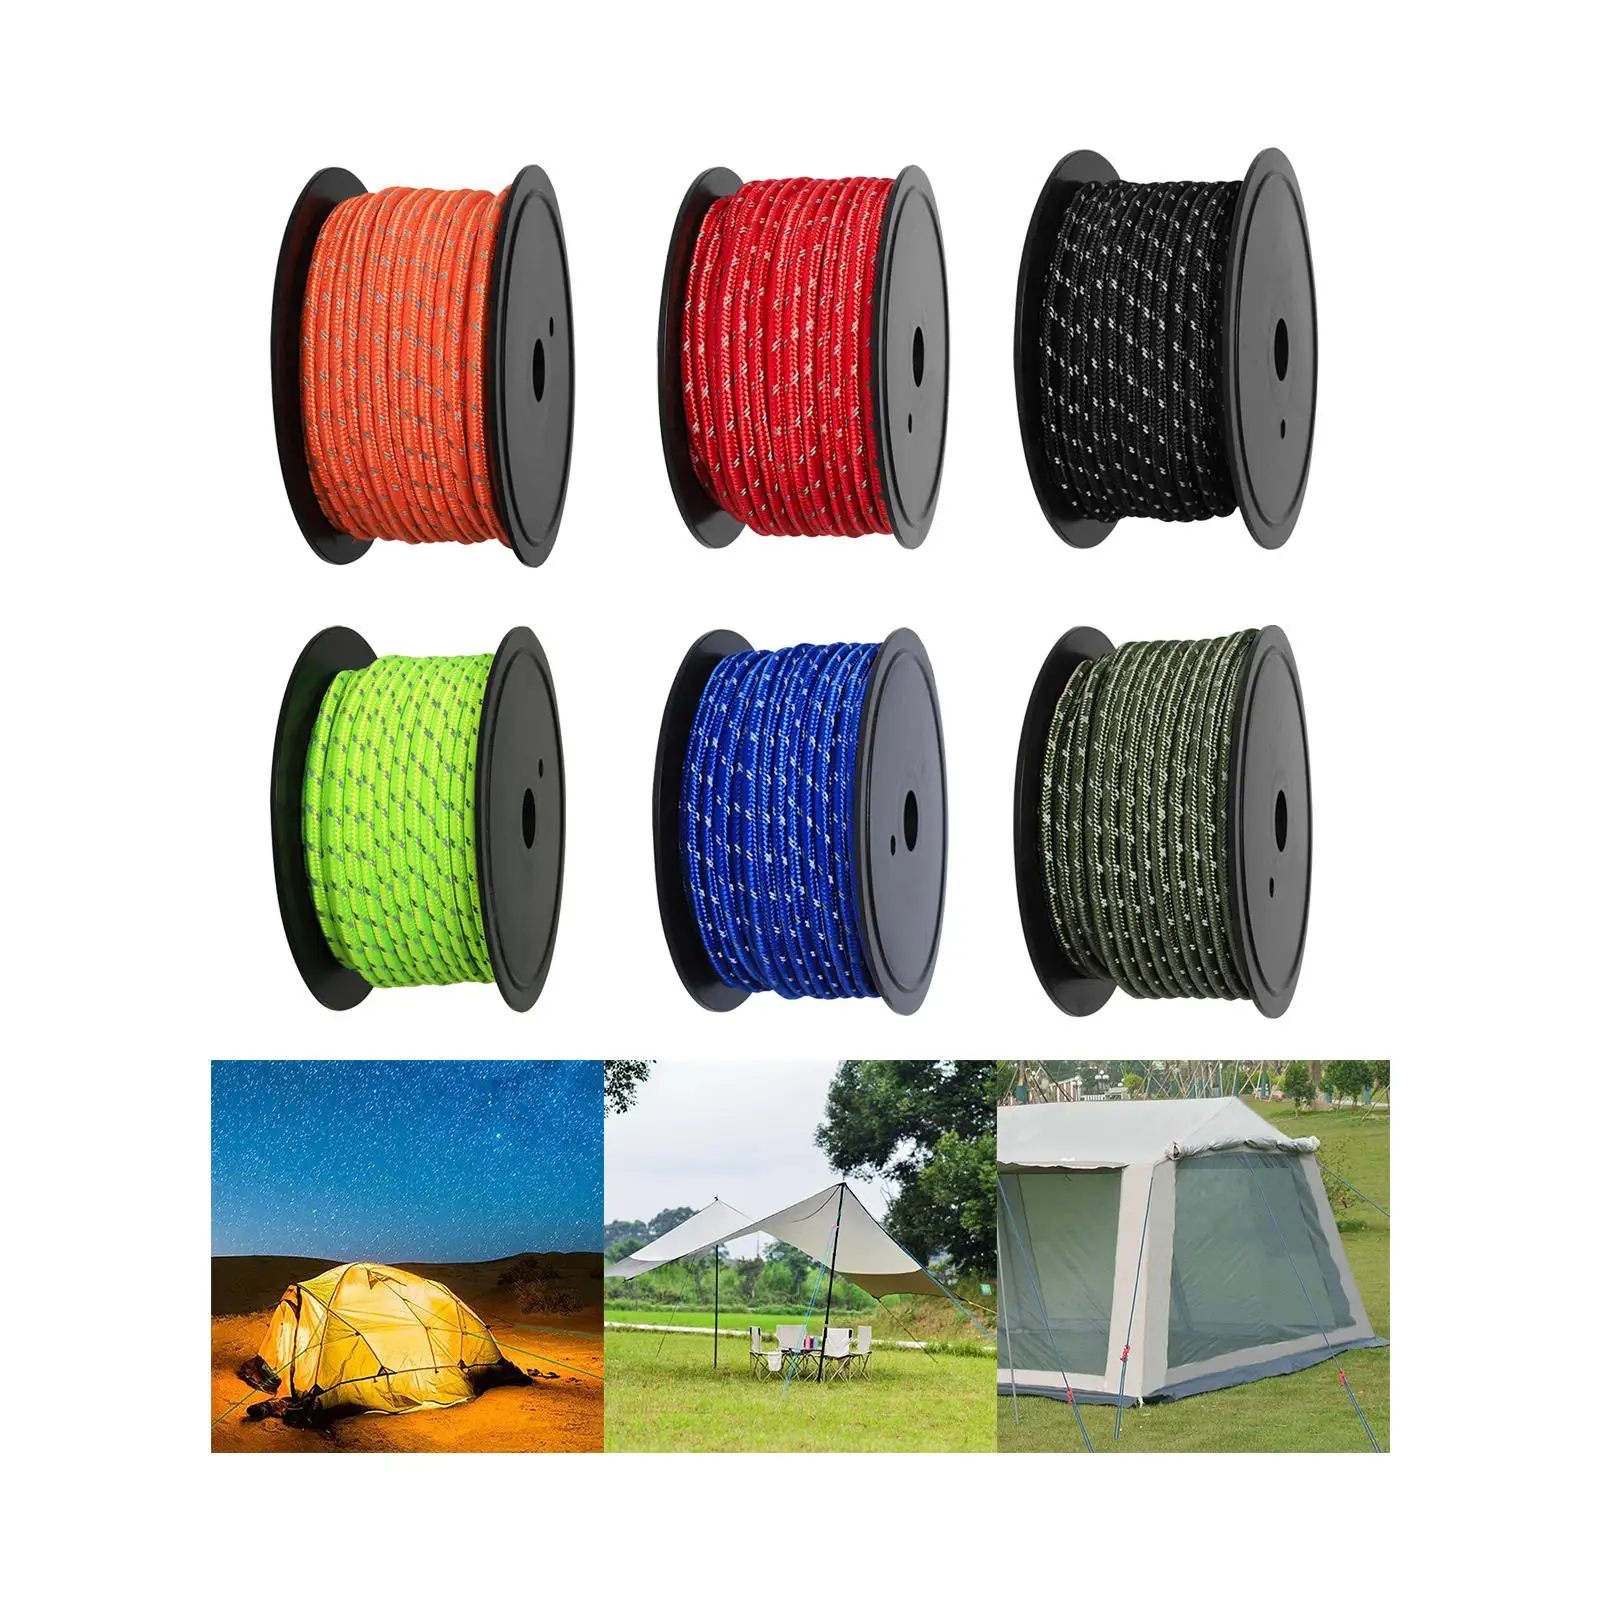 Camping 30M 6mm Reflective Tent Rope Guylines High Tensile Strength Multifunction Solid Braid Weather Resistant Glow in The Dark